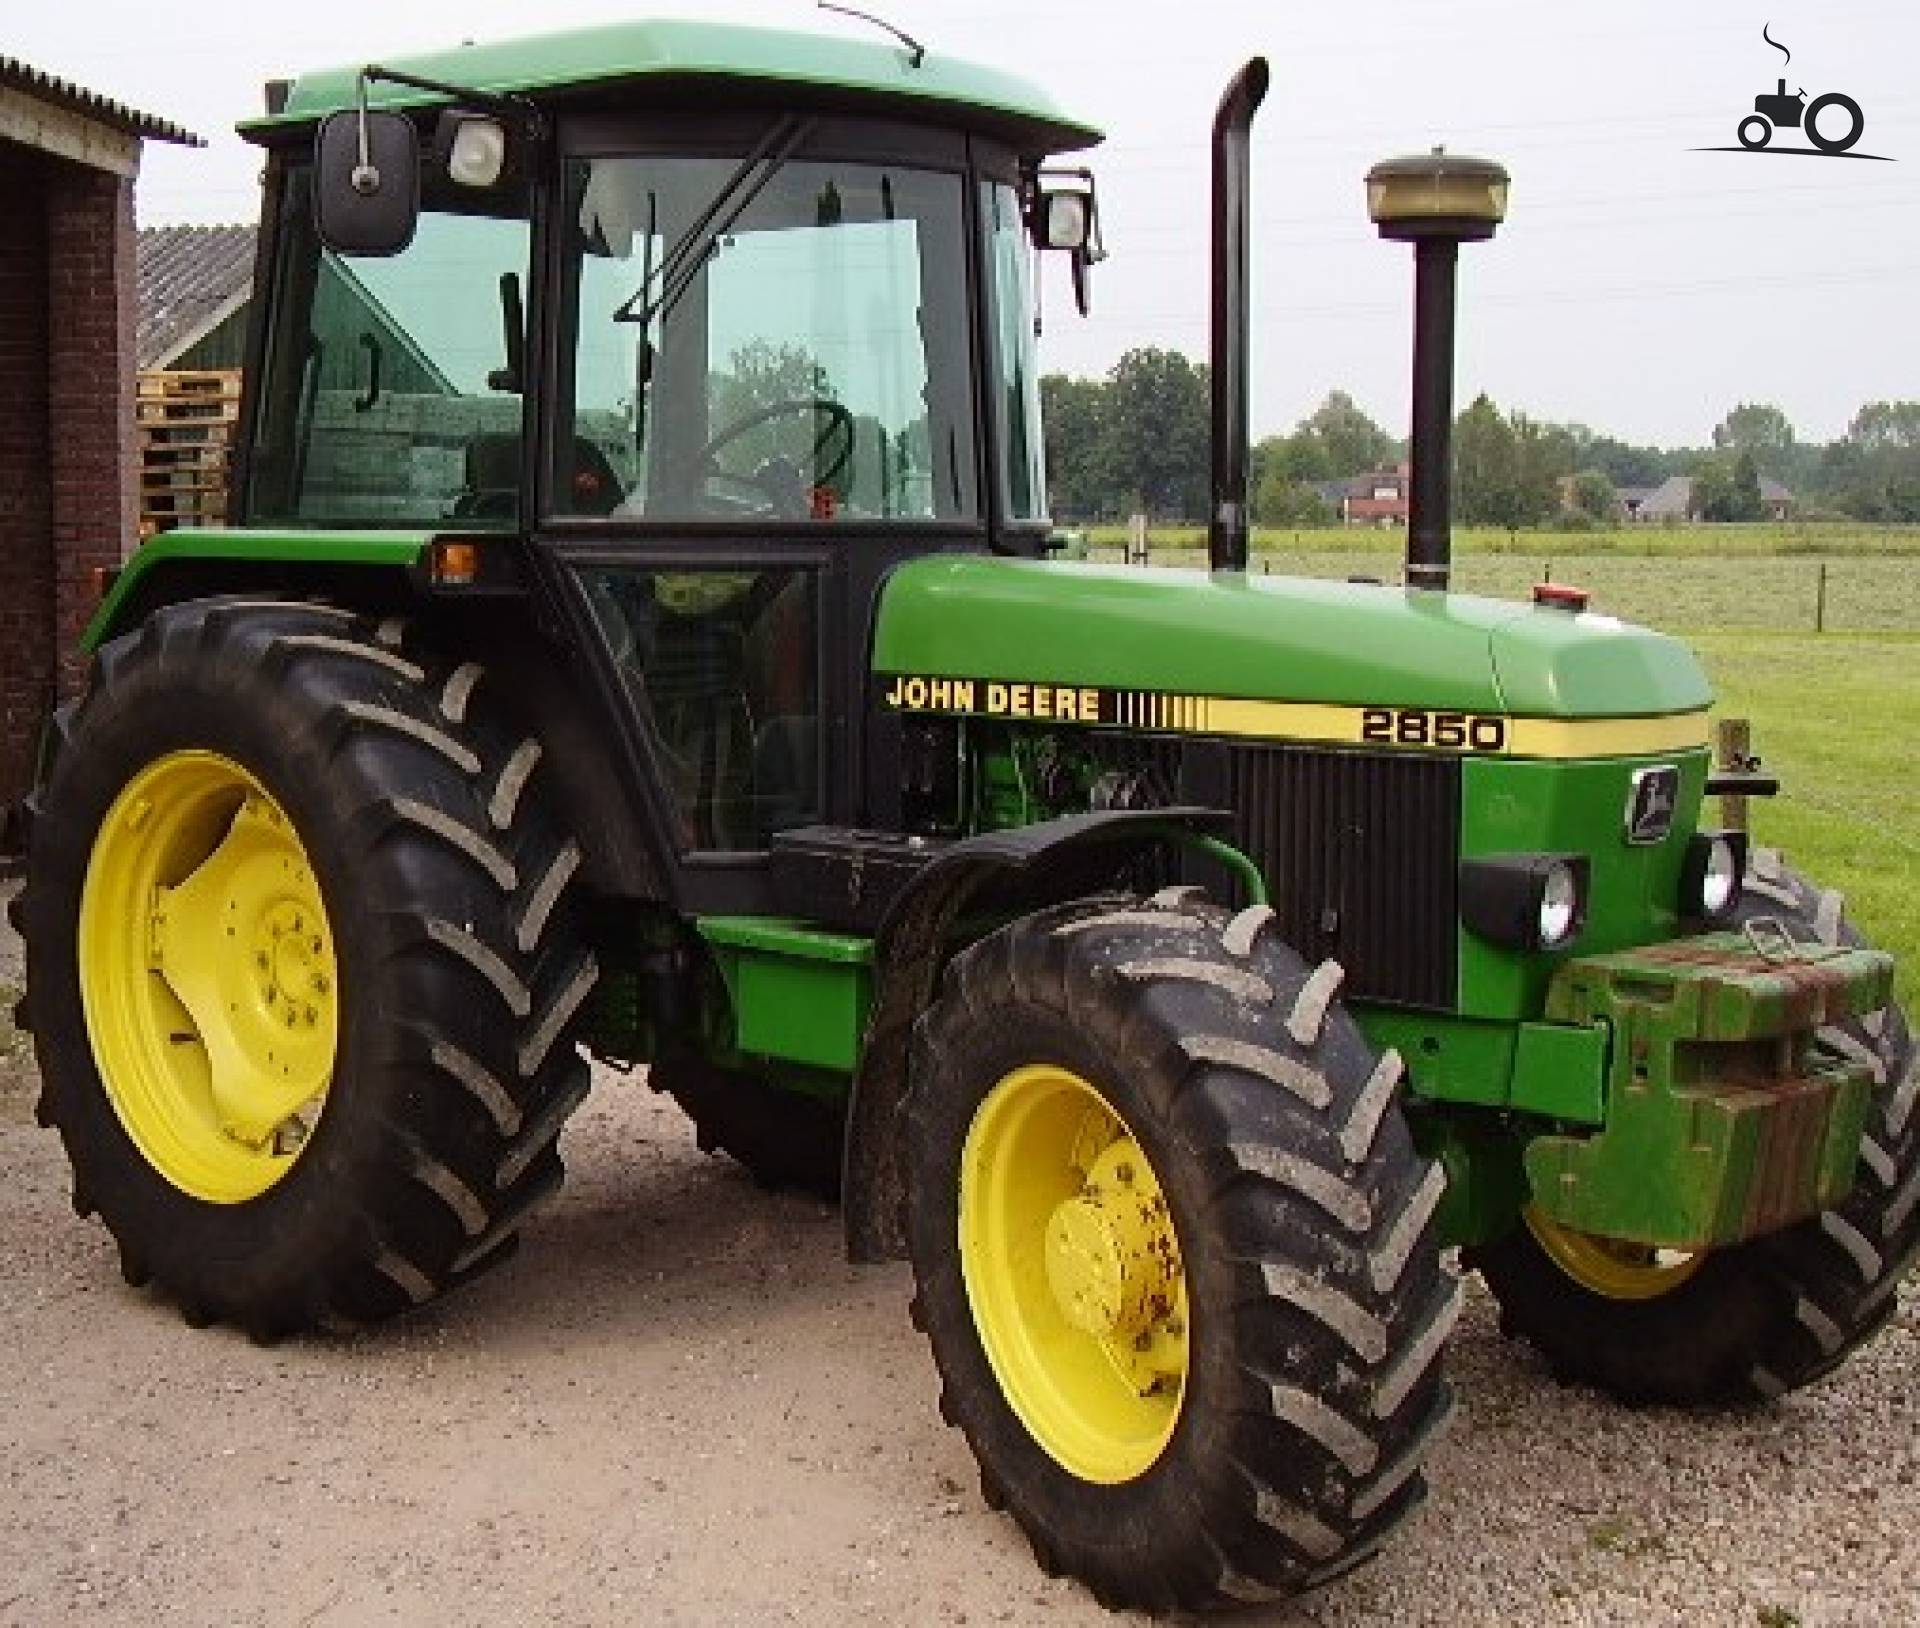 John Deere 2850 Pictures to pin on Pinterest